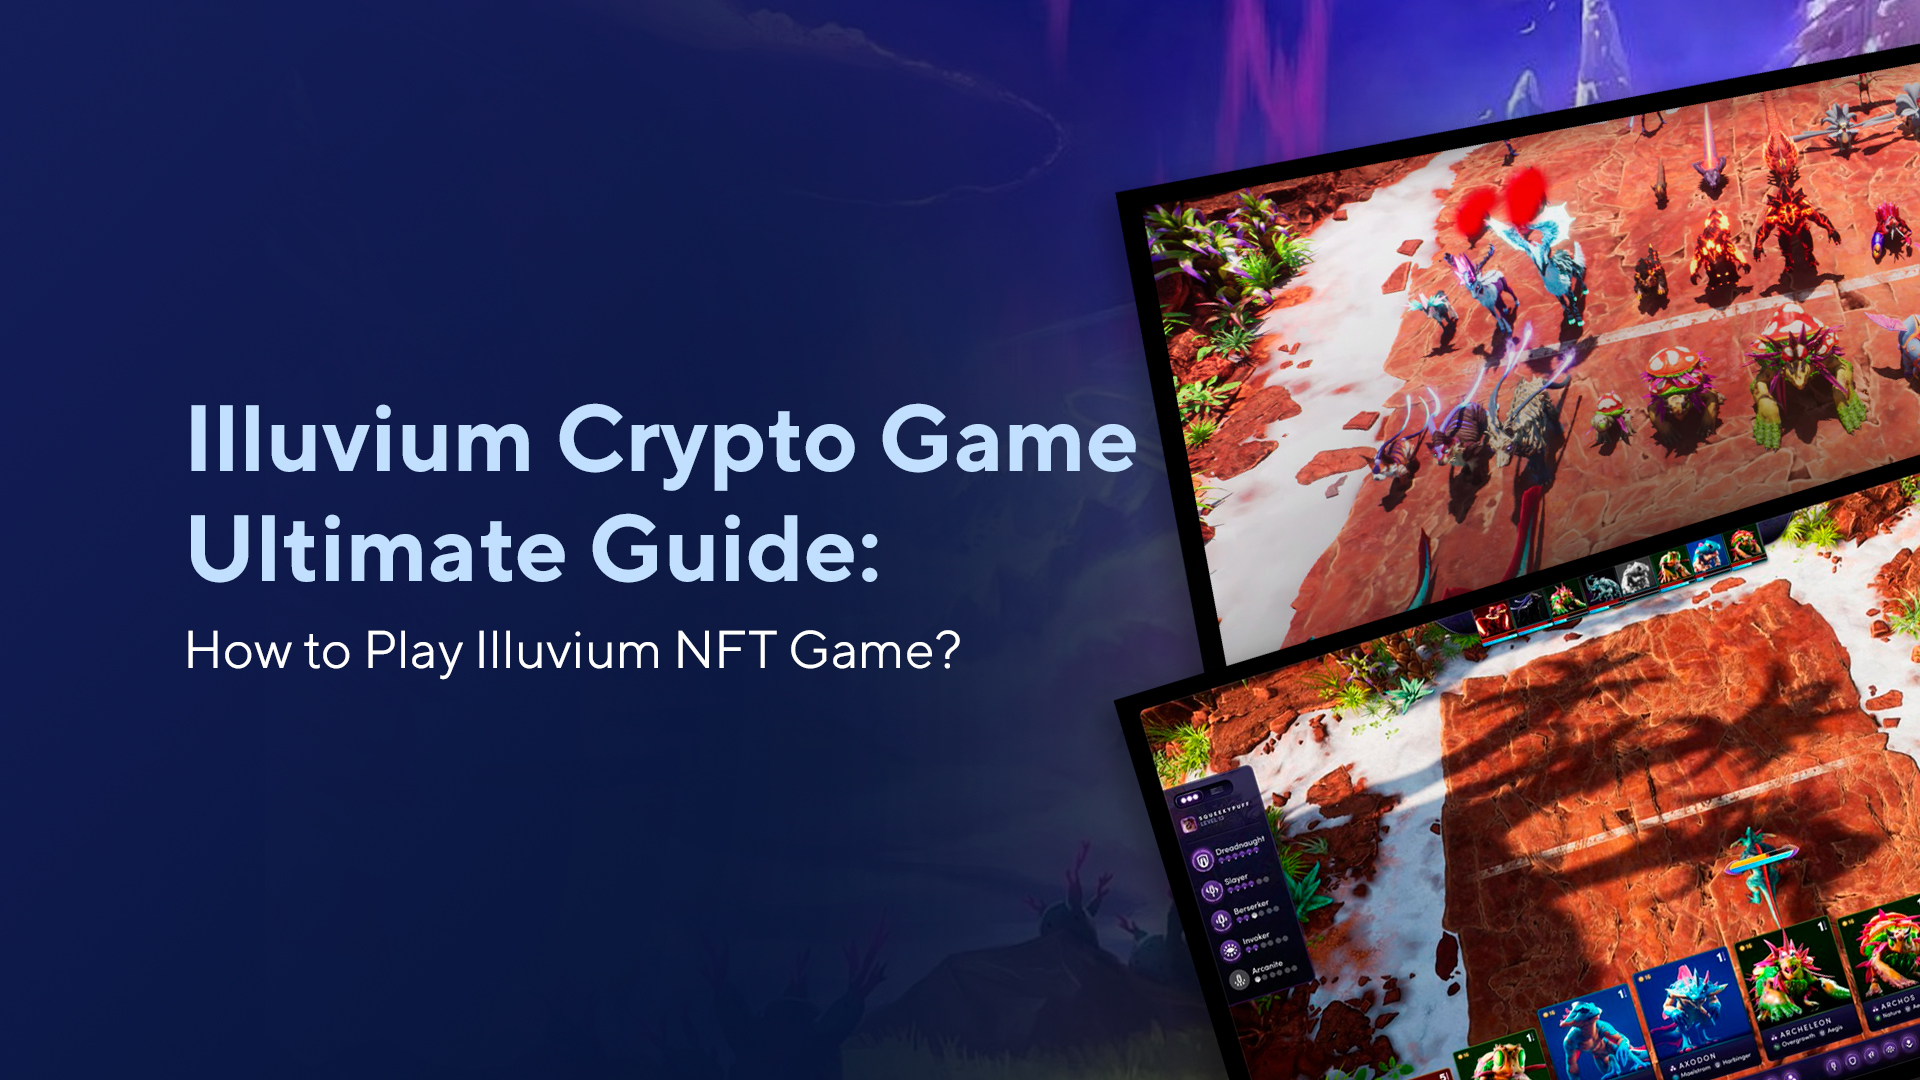 Illuvium Crypto Game Ultimate Guide: How to Play Illuvium NFT Game?